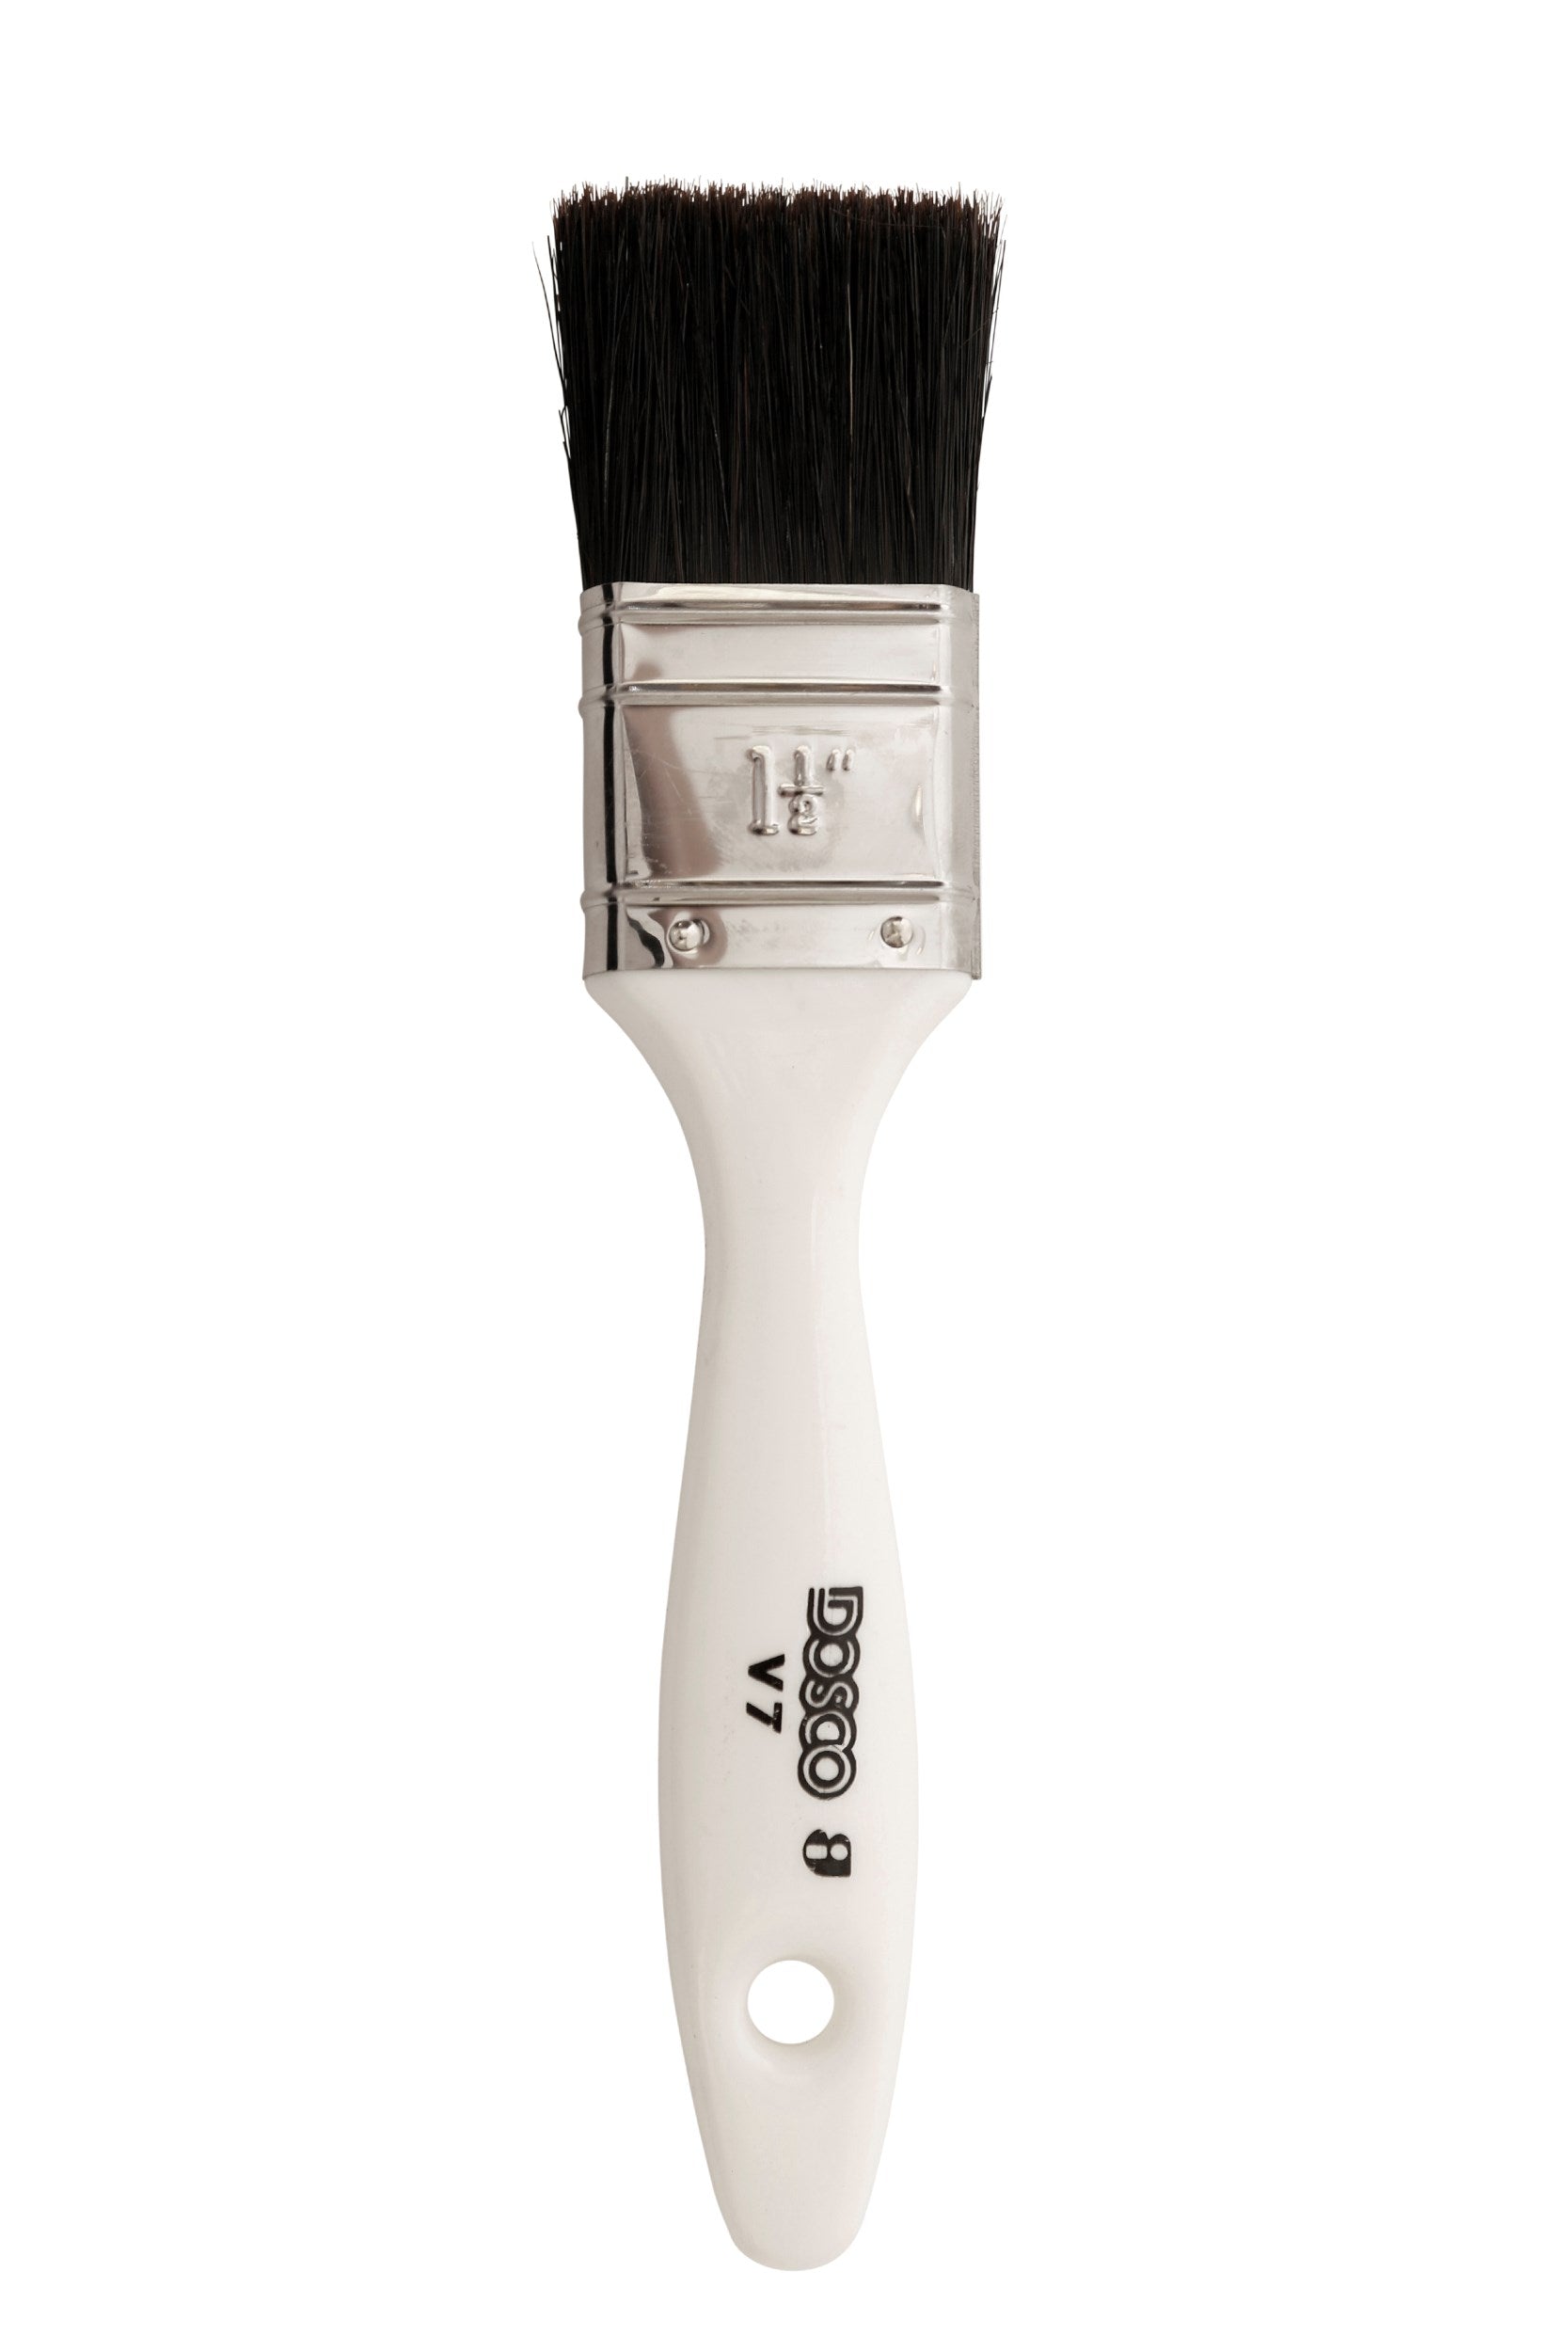 Paint & Decorating | DOSCO All Purpose V7 Paint Brush 1 inch by Weirs of Baggot St